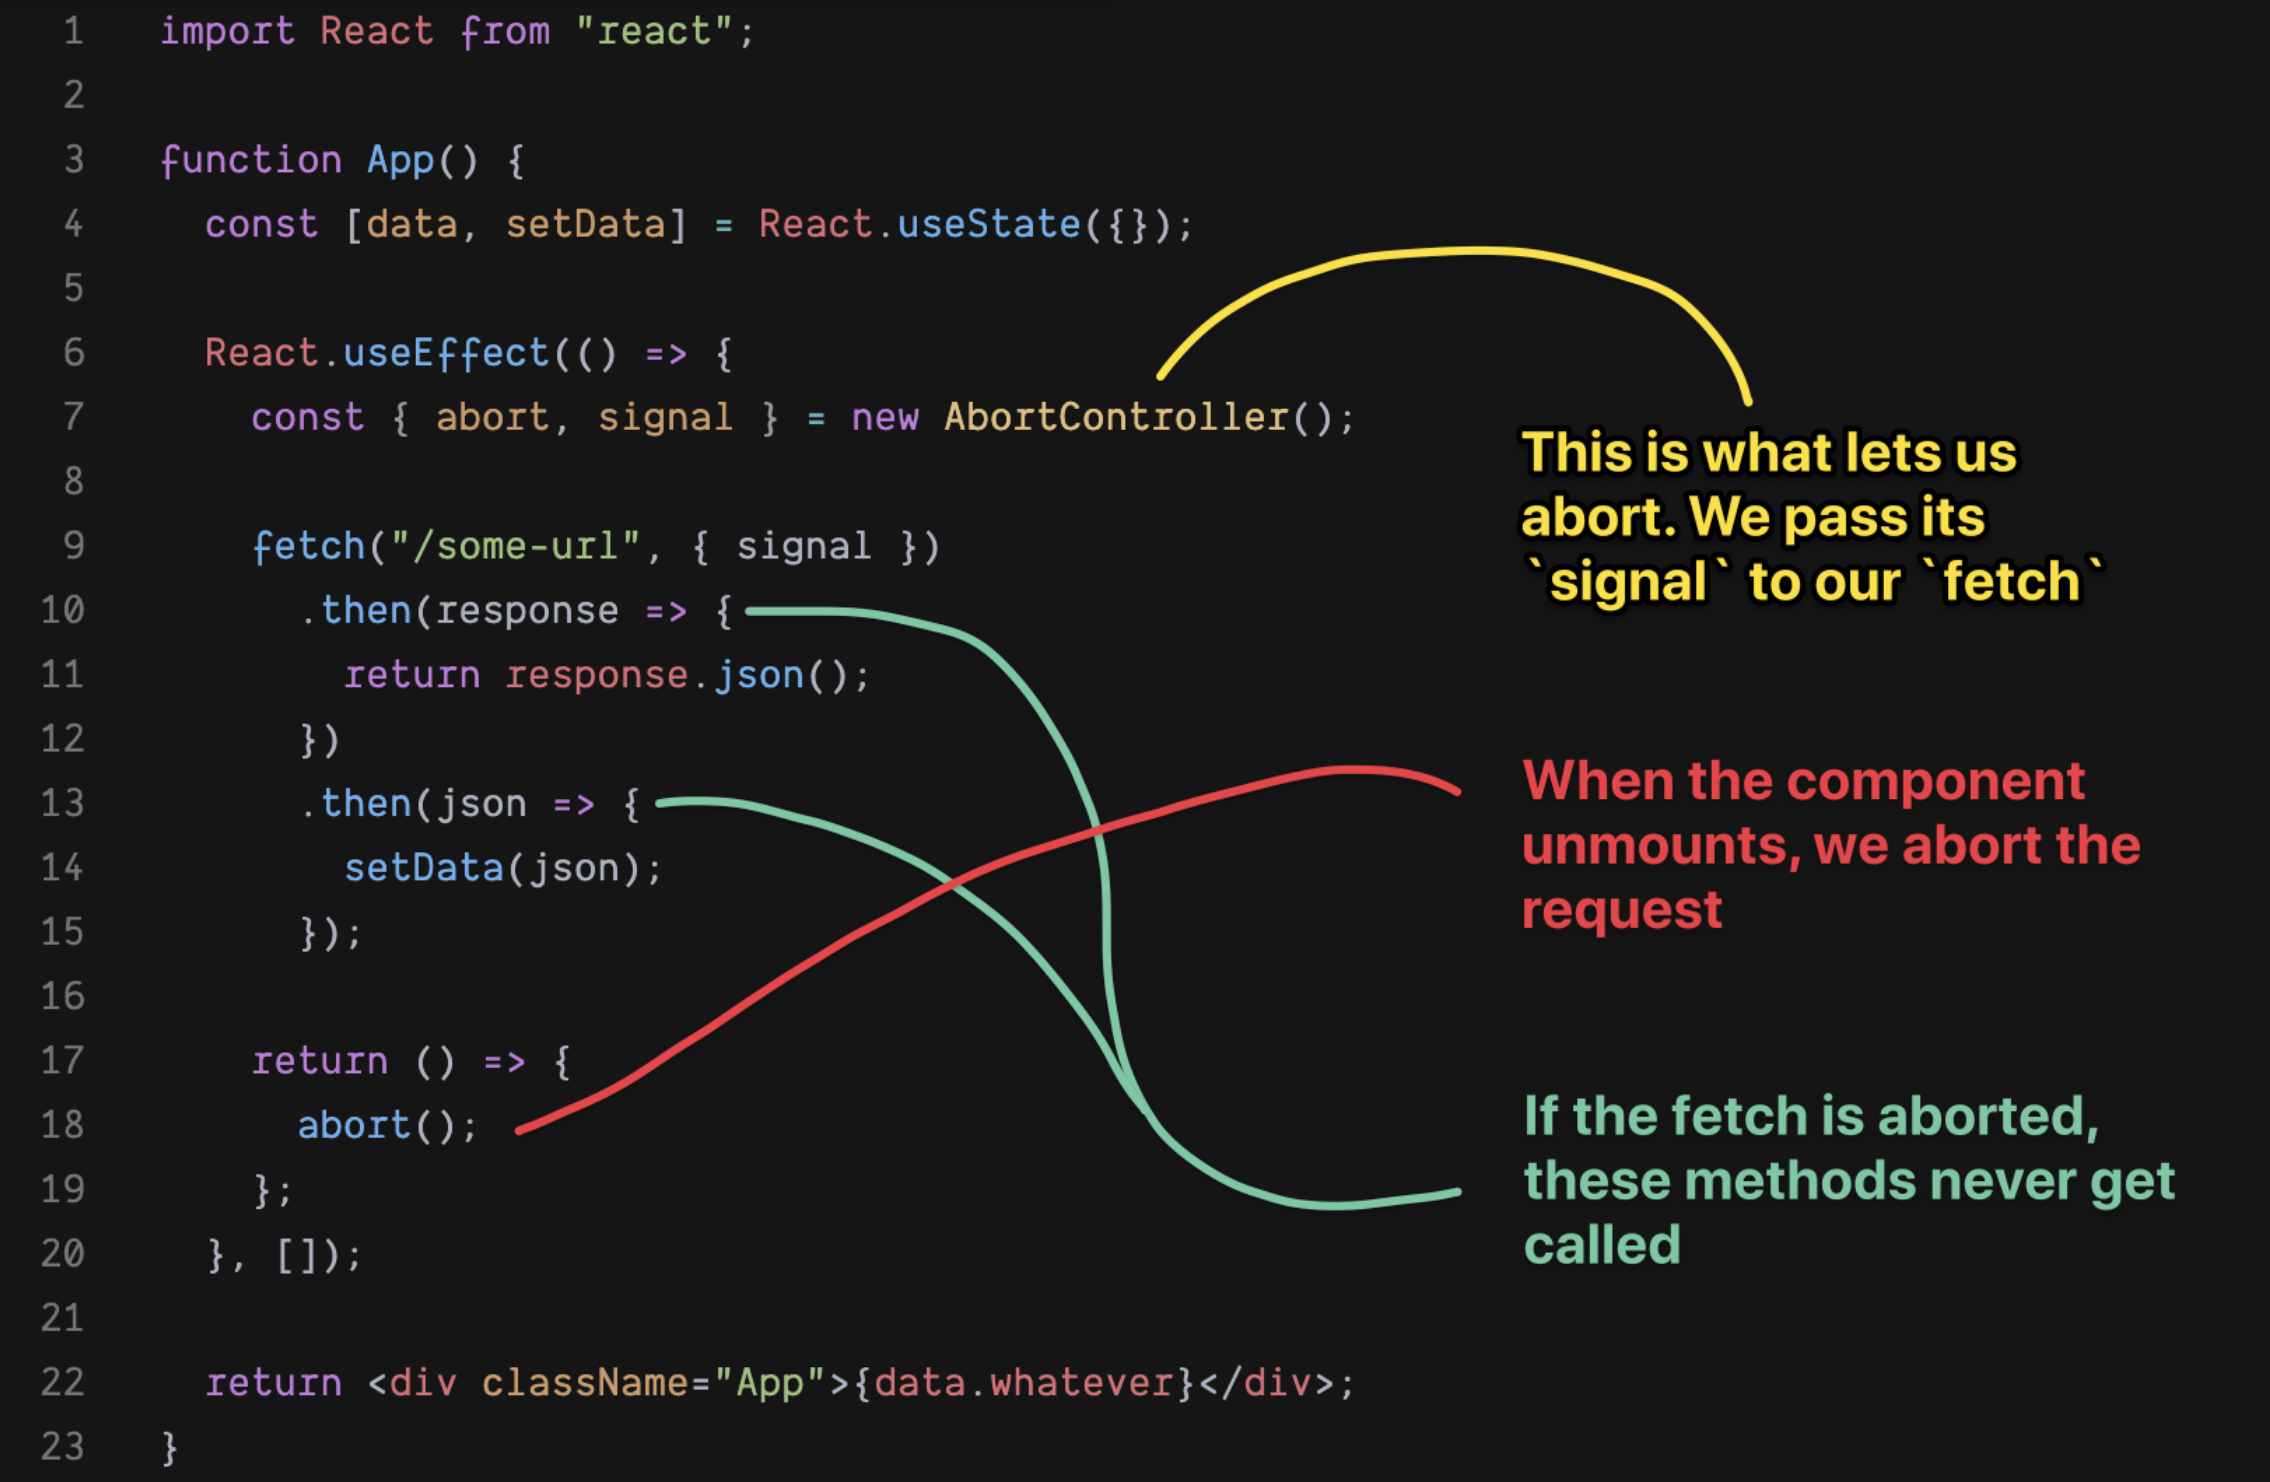 A code snippet showing a cancellable fetch. For code, view sandbox in linked tweet